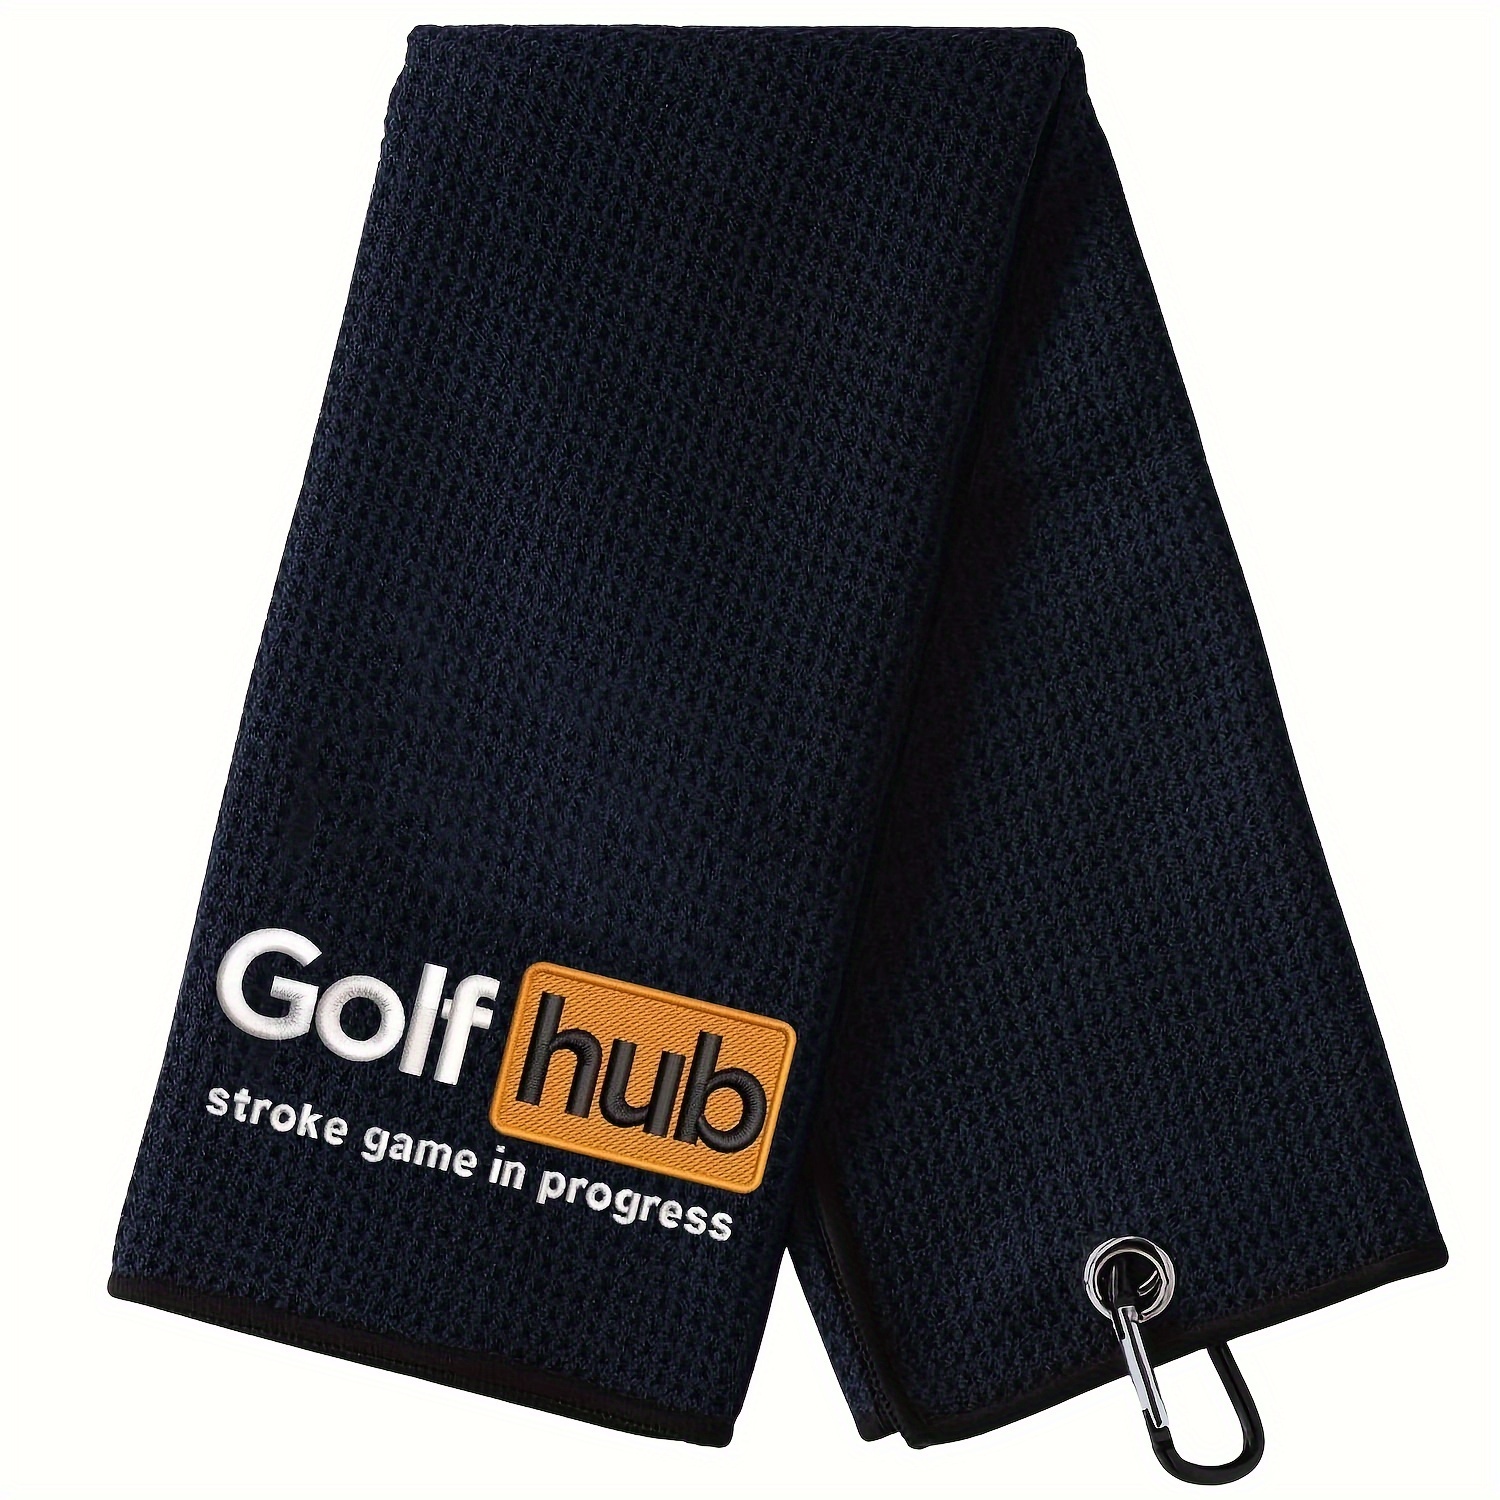 

Golf Golf Towel - Golf Accessories - Golf Gifts For Men & Women - Embroidered Funny Golf Towel For Dad